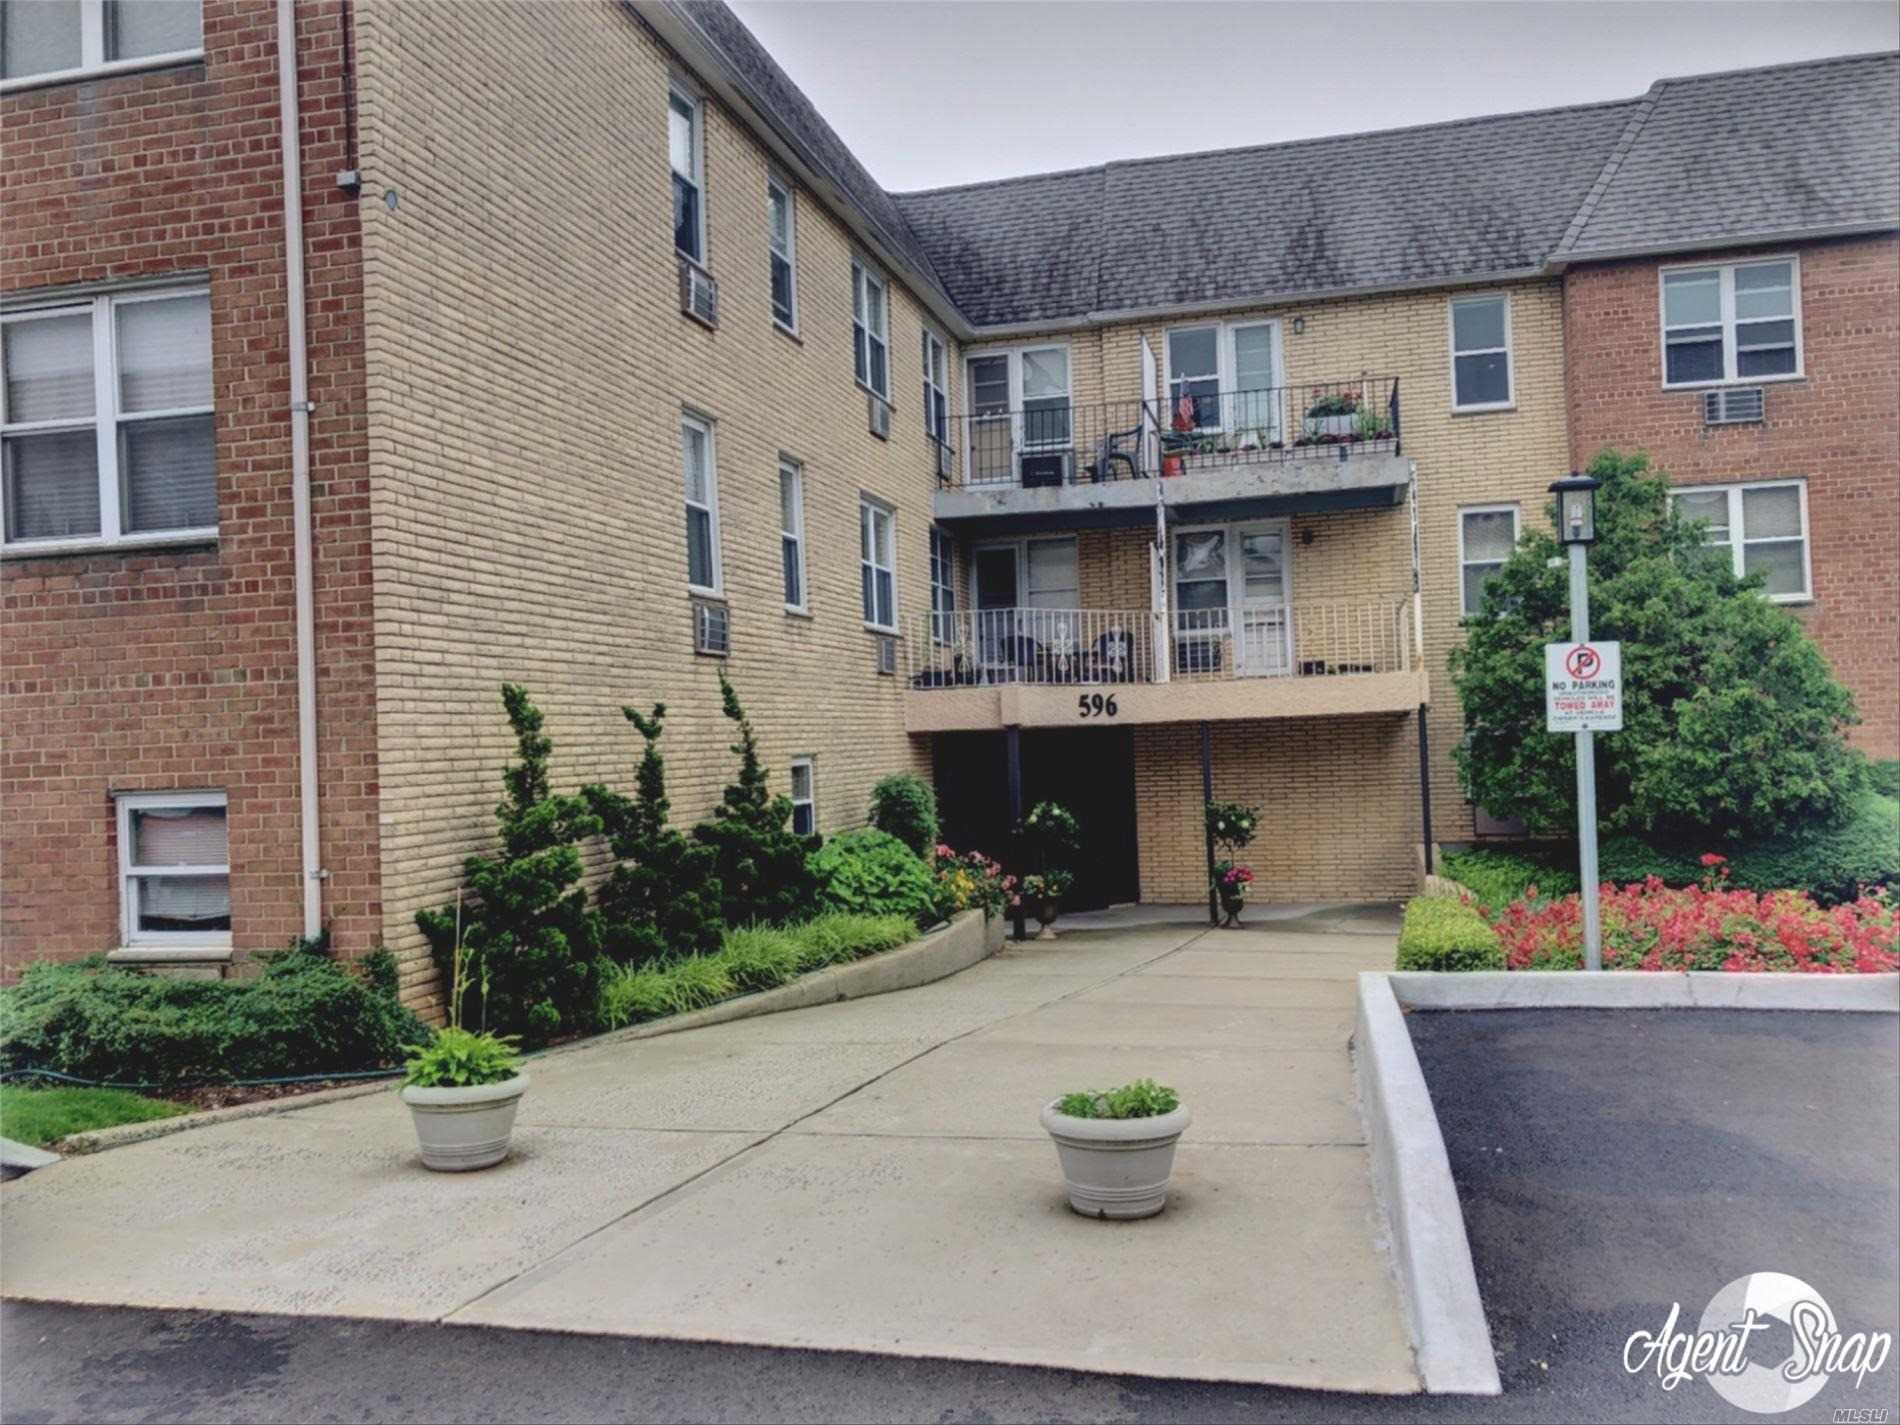 Beautiful Jr 4. Condominium In S. Lynbrook W/ 1 Free Garage Parking Spot! This Top-Floor Condo Boasts An Kitchen w/ Newer Appls, New Light Fixtures, Freshly Painted, Large Lr, Formal Dining Room, King-Size Bedroom & Tons of Closets! Low Common Charges Of Only $307/Mth Incl Heat/Water/Gas/Strg Spot/Ig Pool/1 Parking Spot...Wow! Building Has All Brand New-IG Pool/Driveway/Roof/Boilers & Ldry Rm. Close To LIRR.